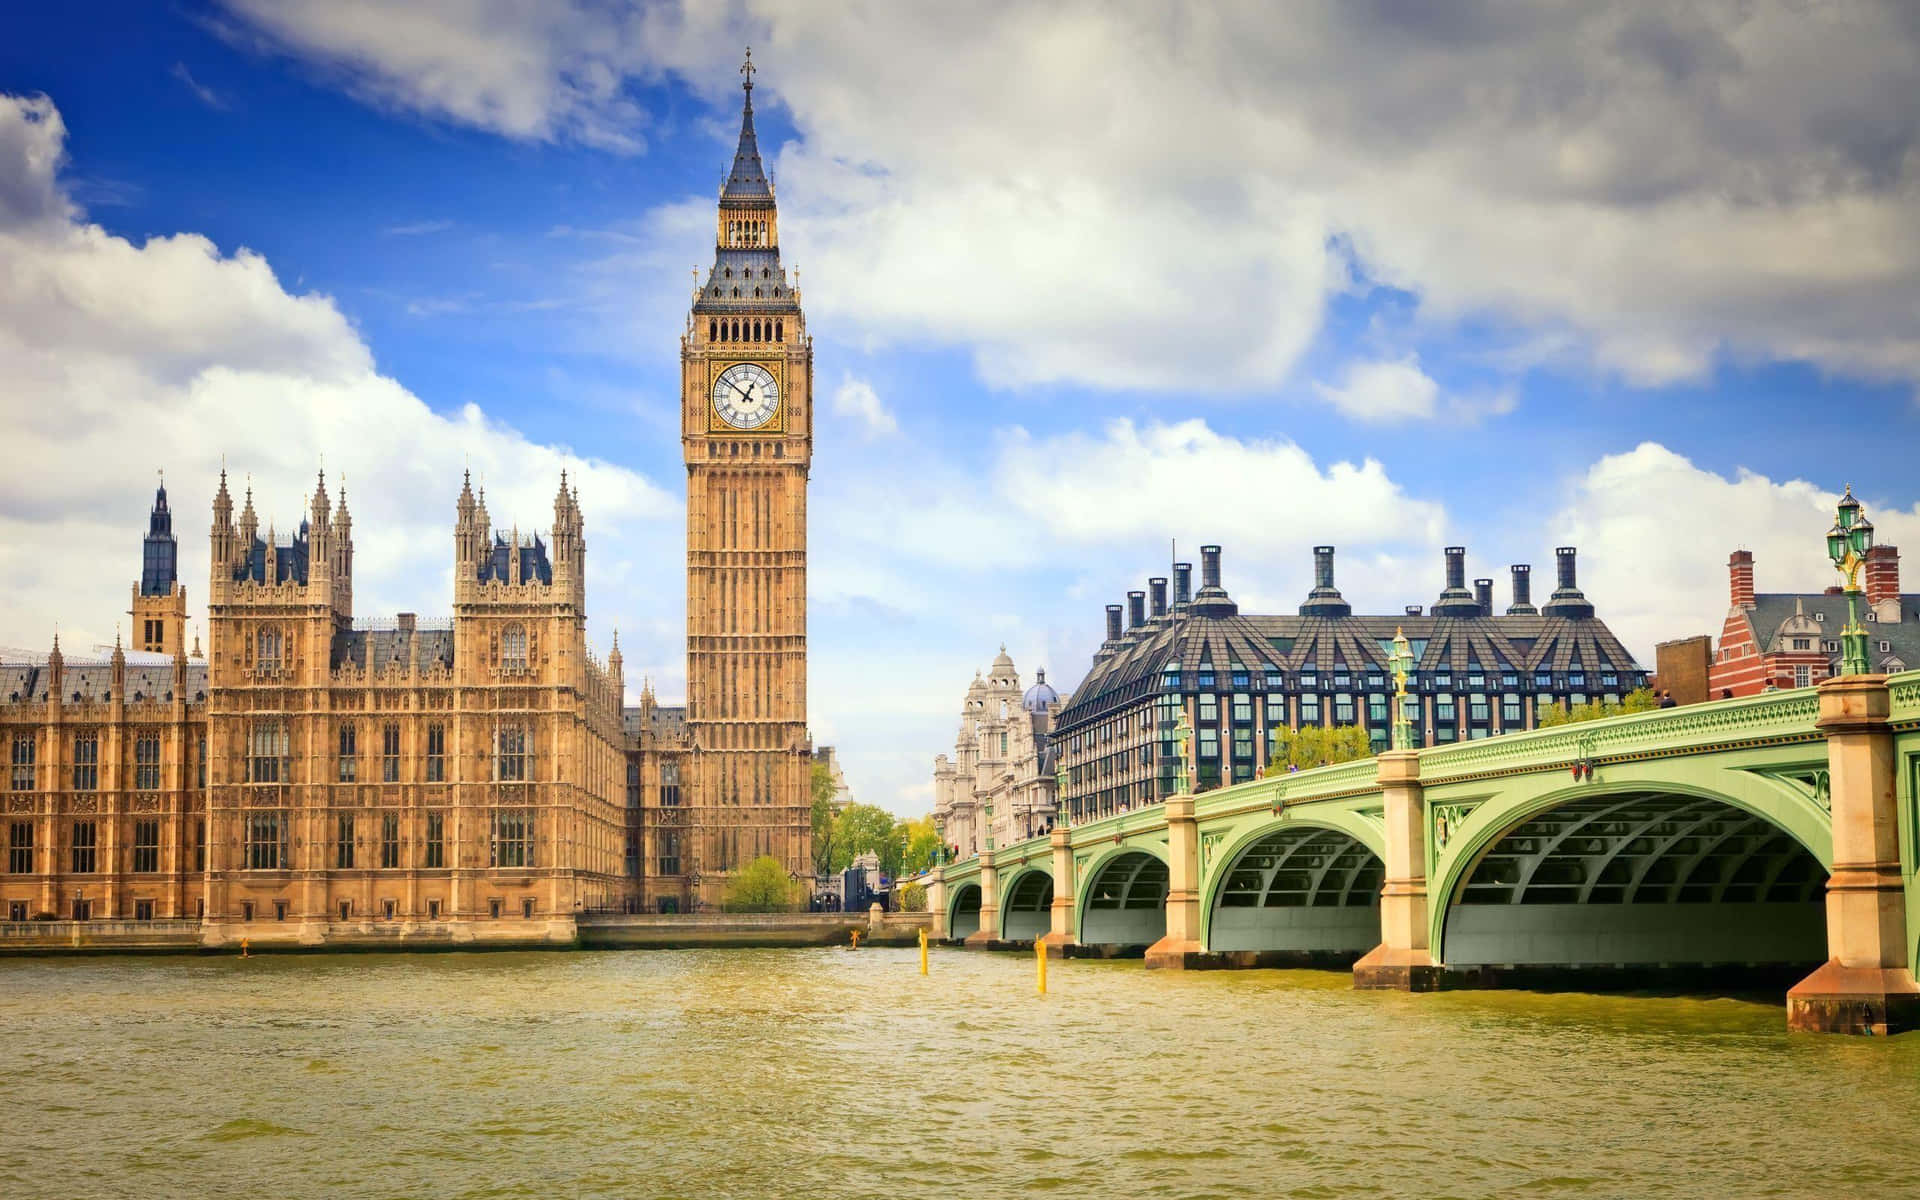 Enjoy the breathtaking view of the River Thames in London